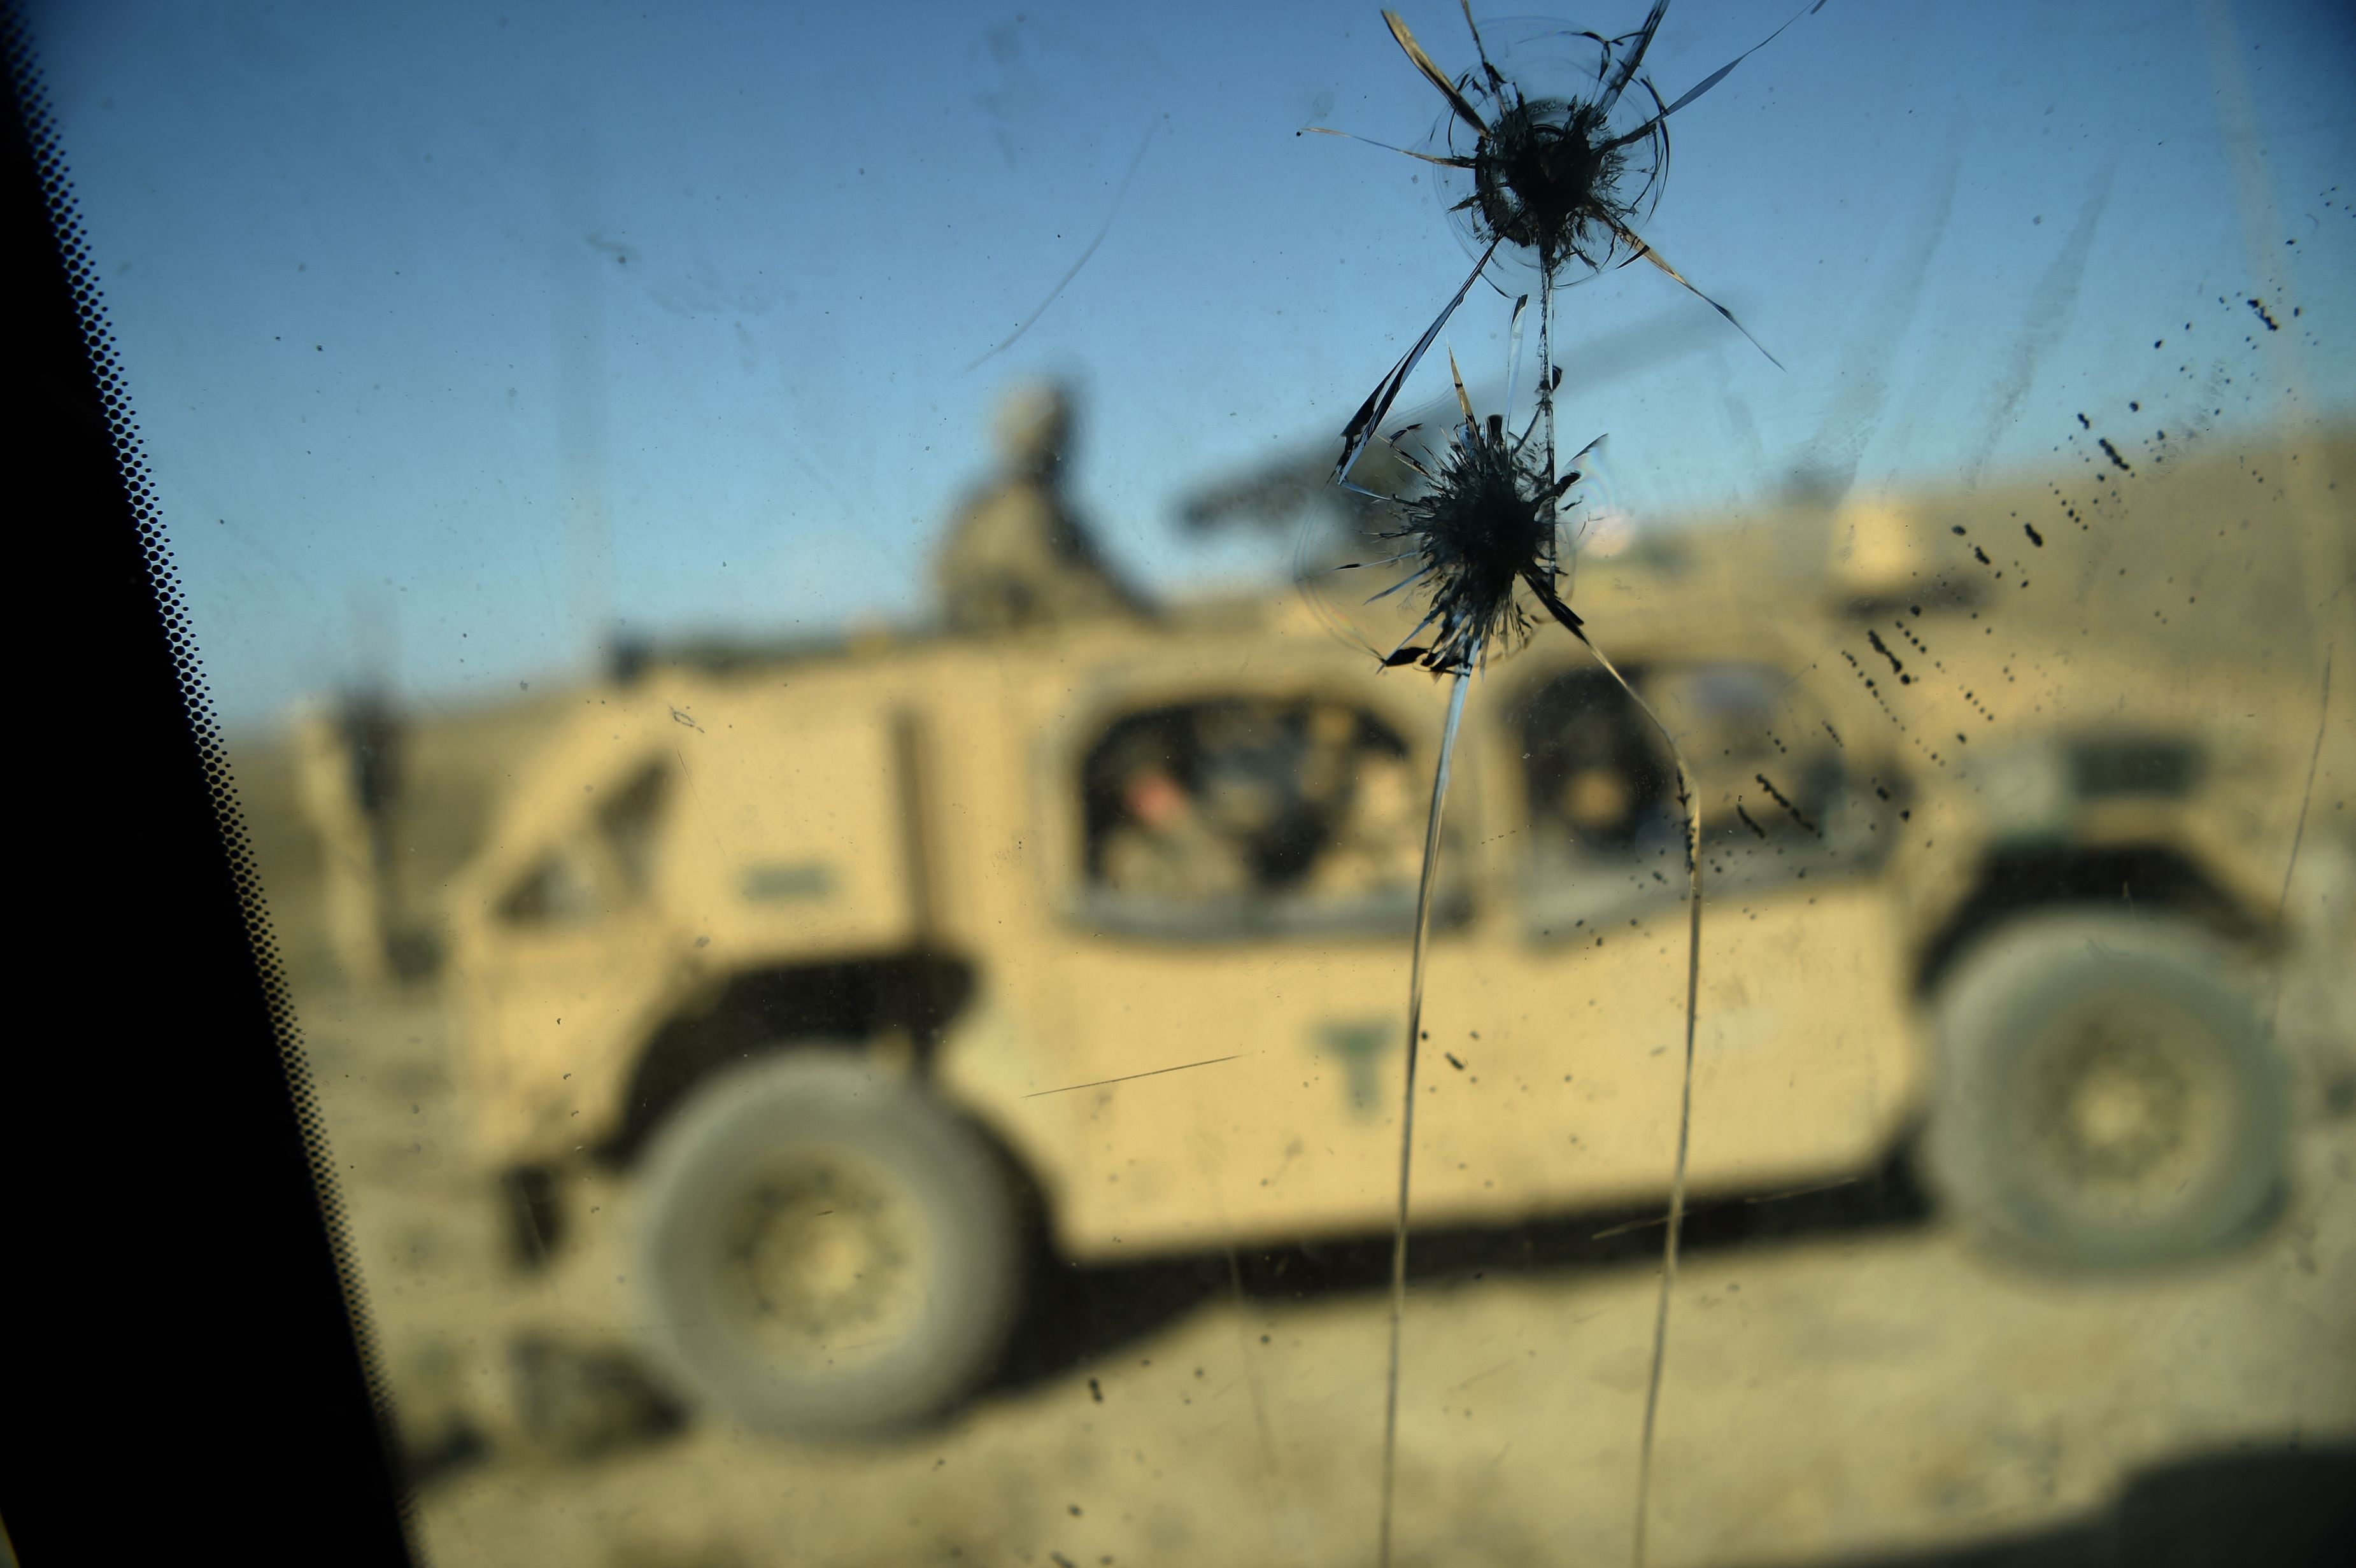 US soldiers who are part of the Nato deployment are seen through the cracked window of an armoured vehicle in Afghanistan’s Nangarhar province in July 2018. US retrenchment in Afghanistan was a campaign promise by President Donald Trump. Photo: AFP